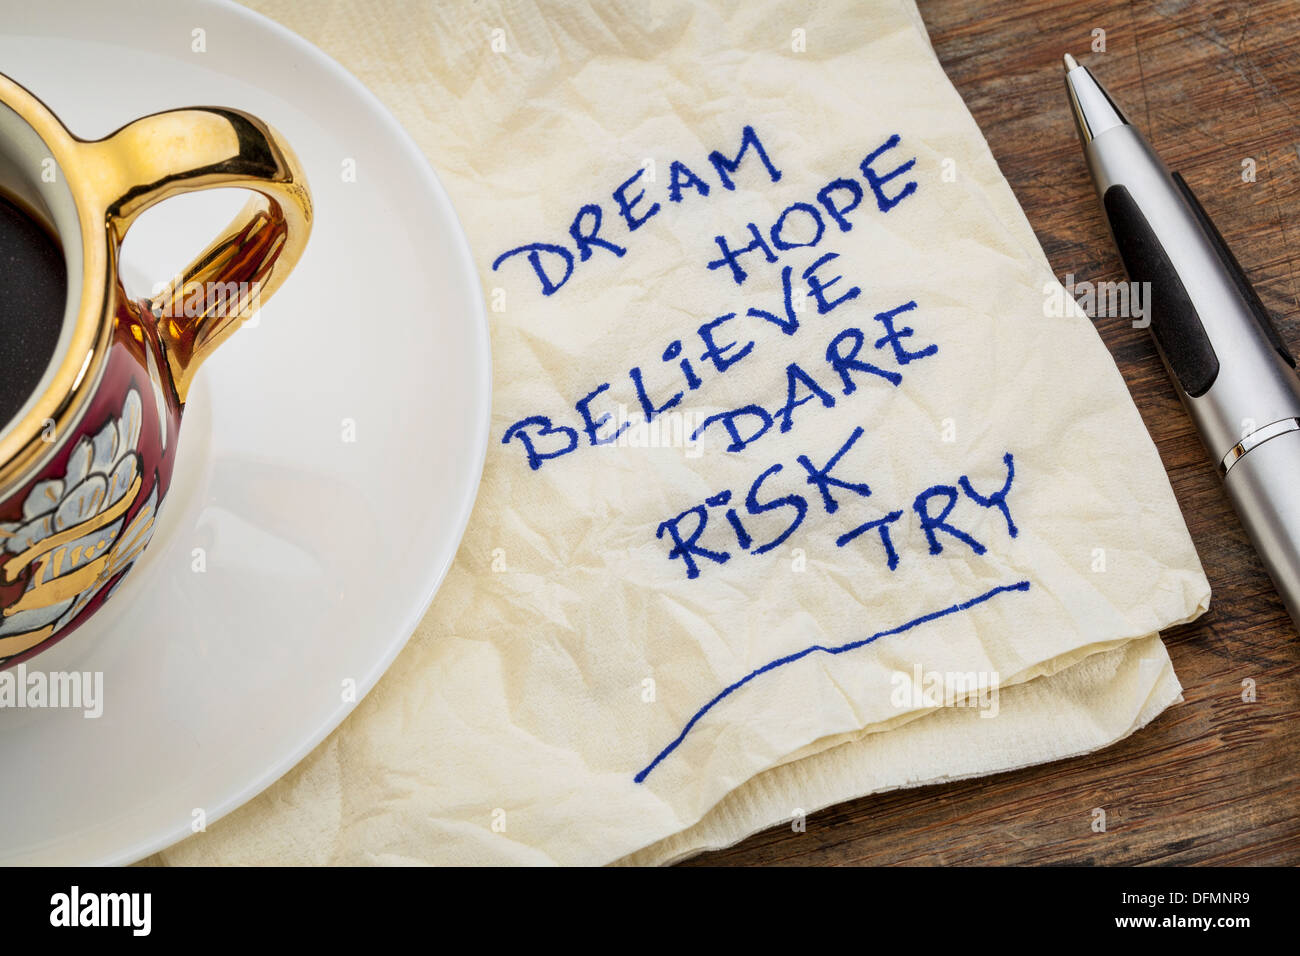 dream, hope, believe, dare, risk, try - motivational words - a napkin doodle with a cup of espresso coffee Stock Photo